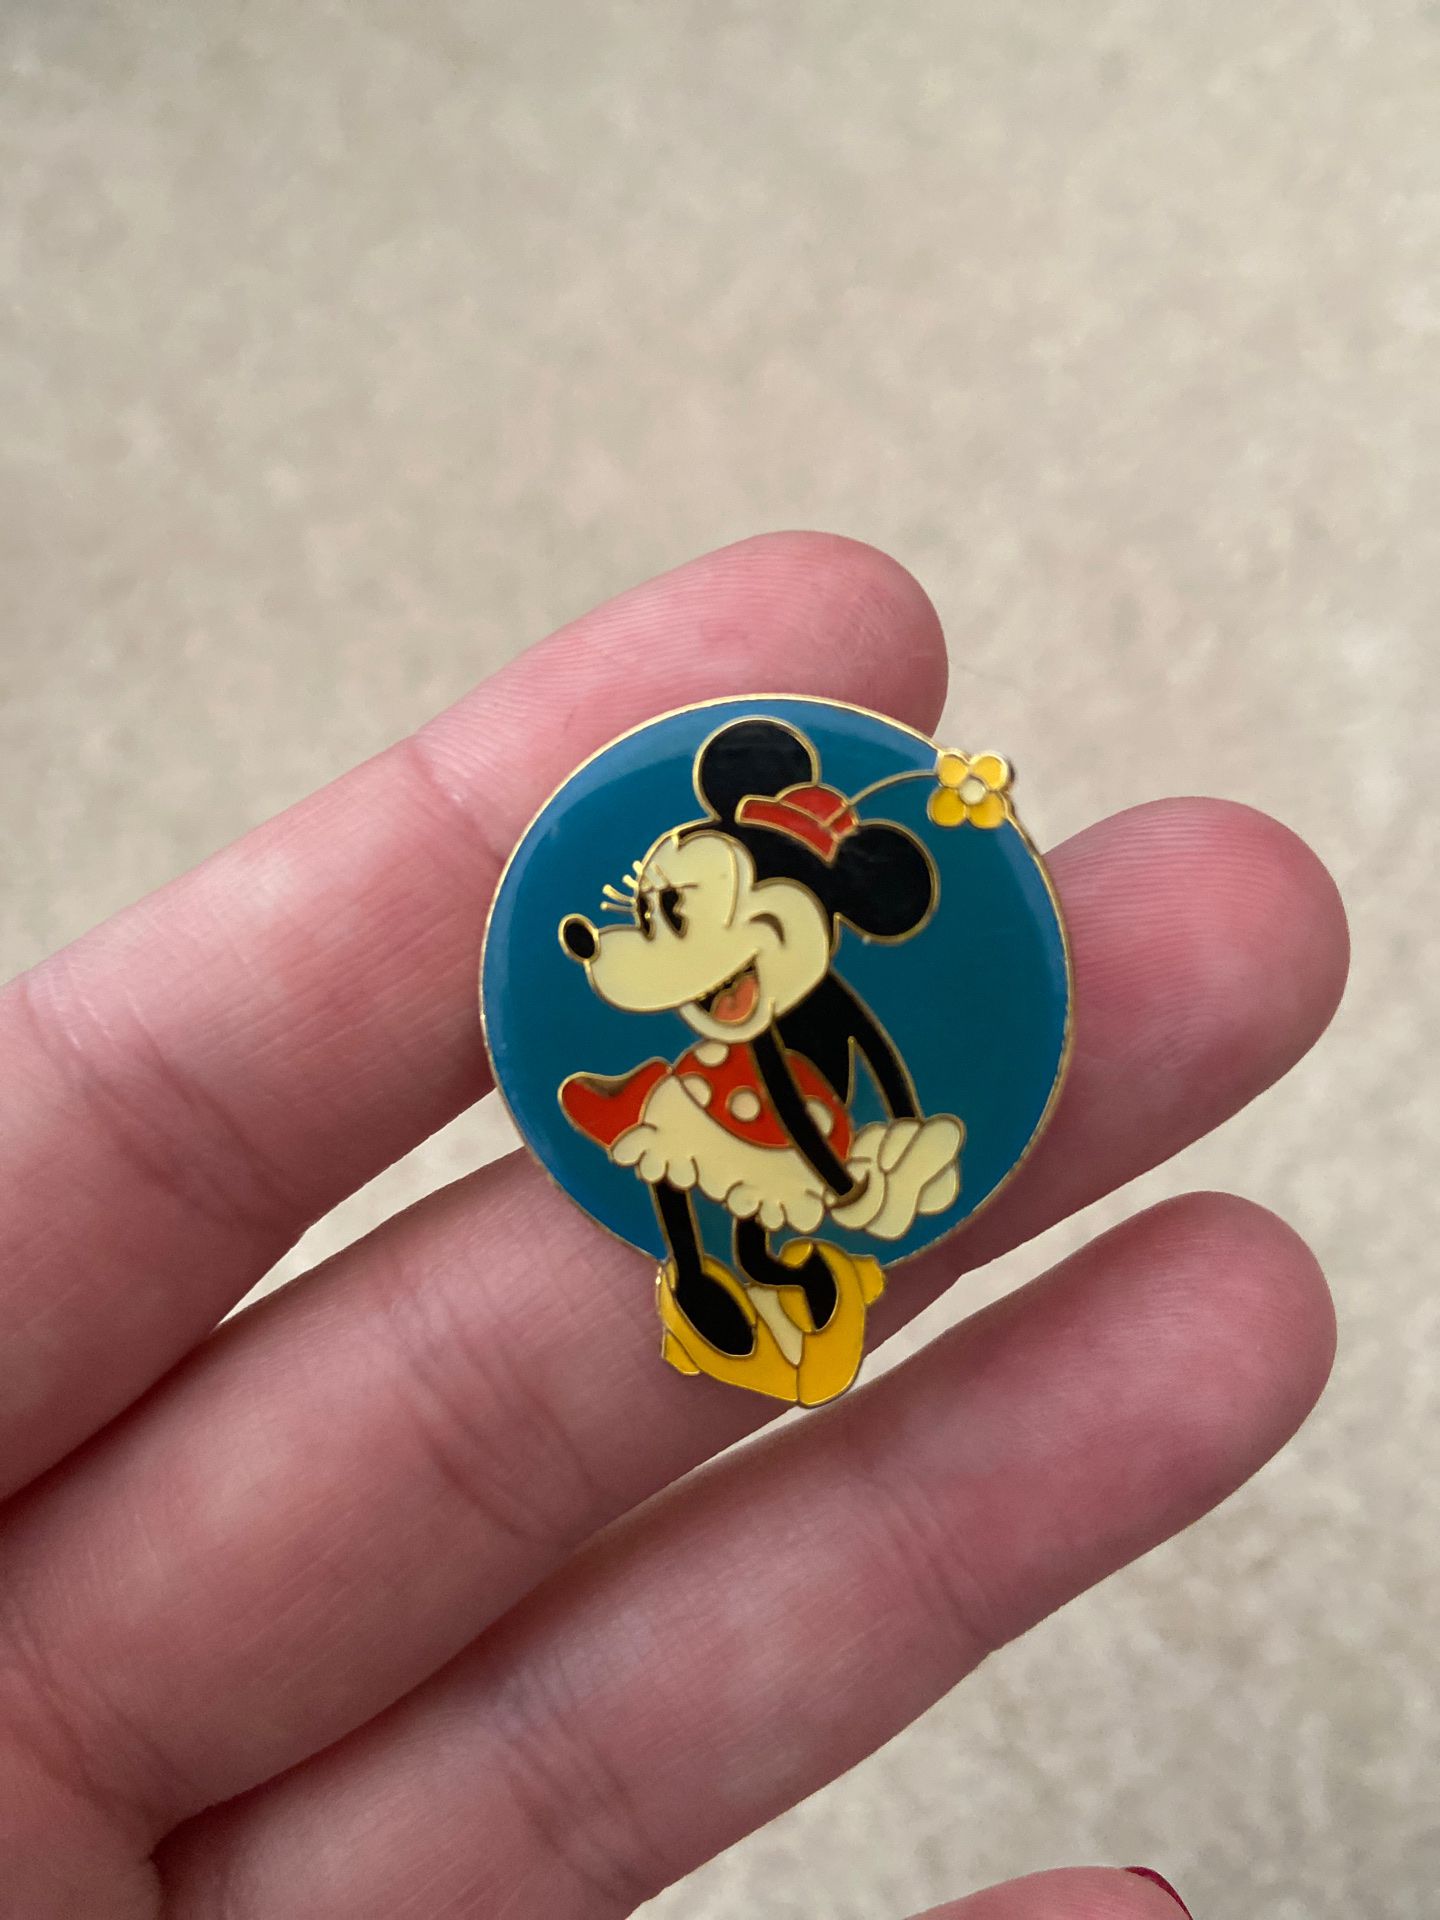 Disney channel Minnie Mouse pin retired